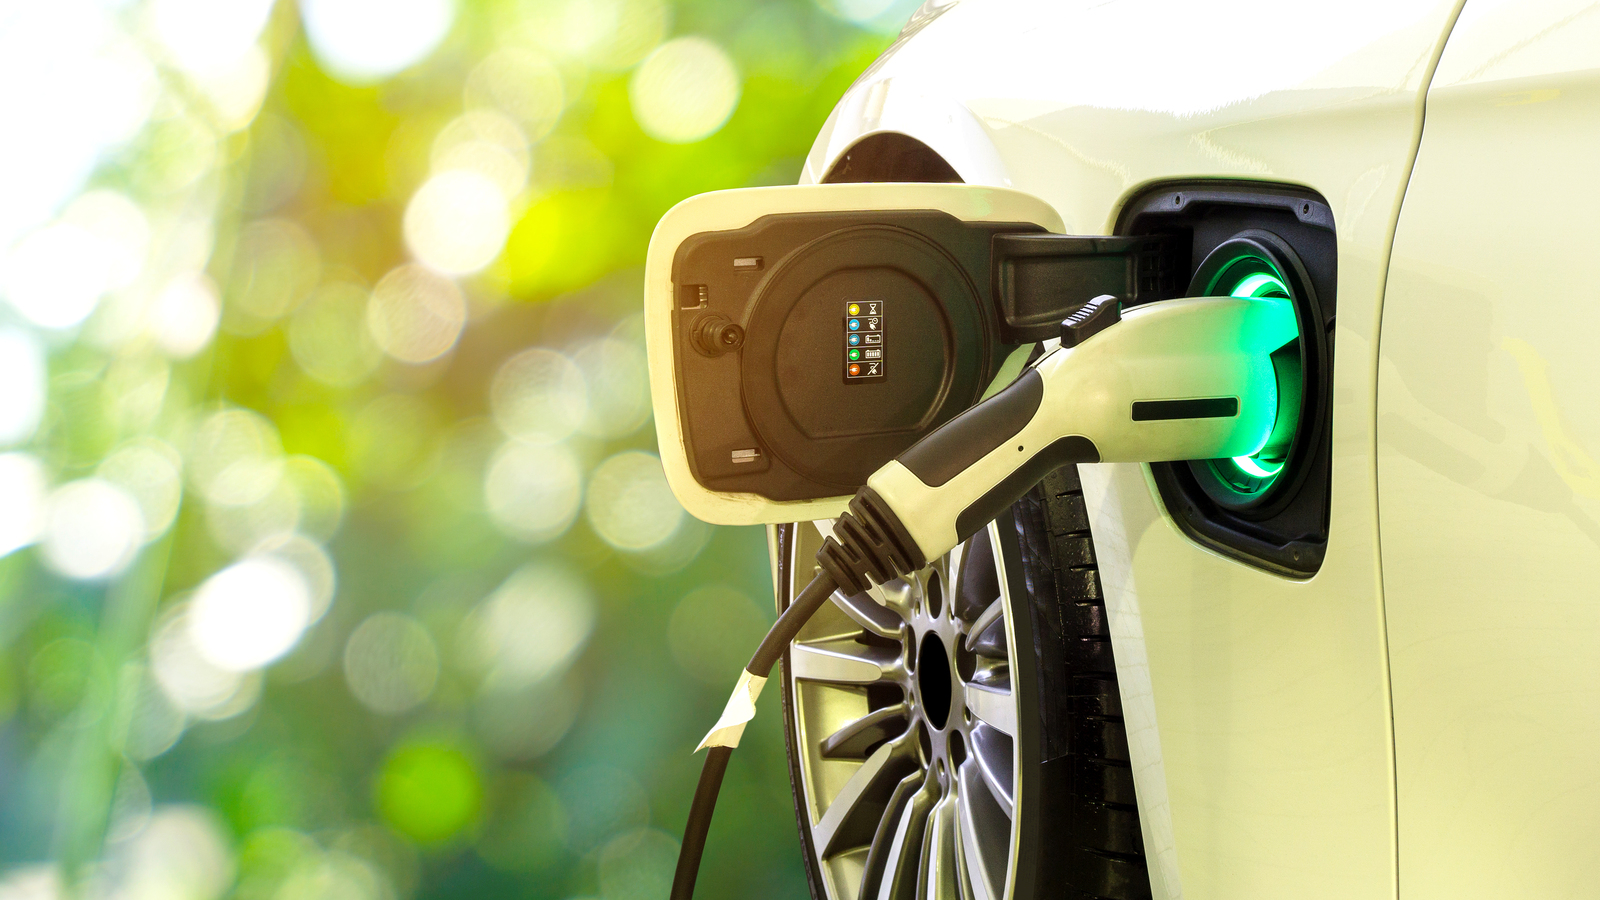 Oxfordshire awarded £3.6 million to triple public electric vehicle charging provision by 2025